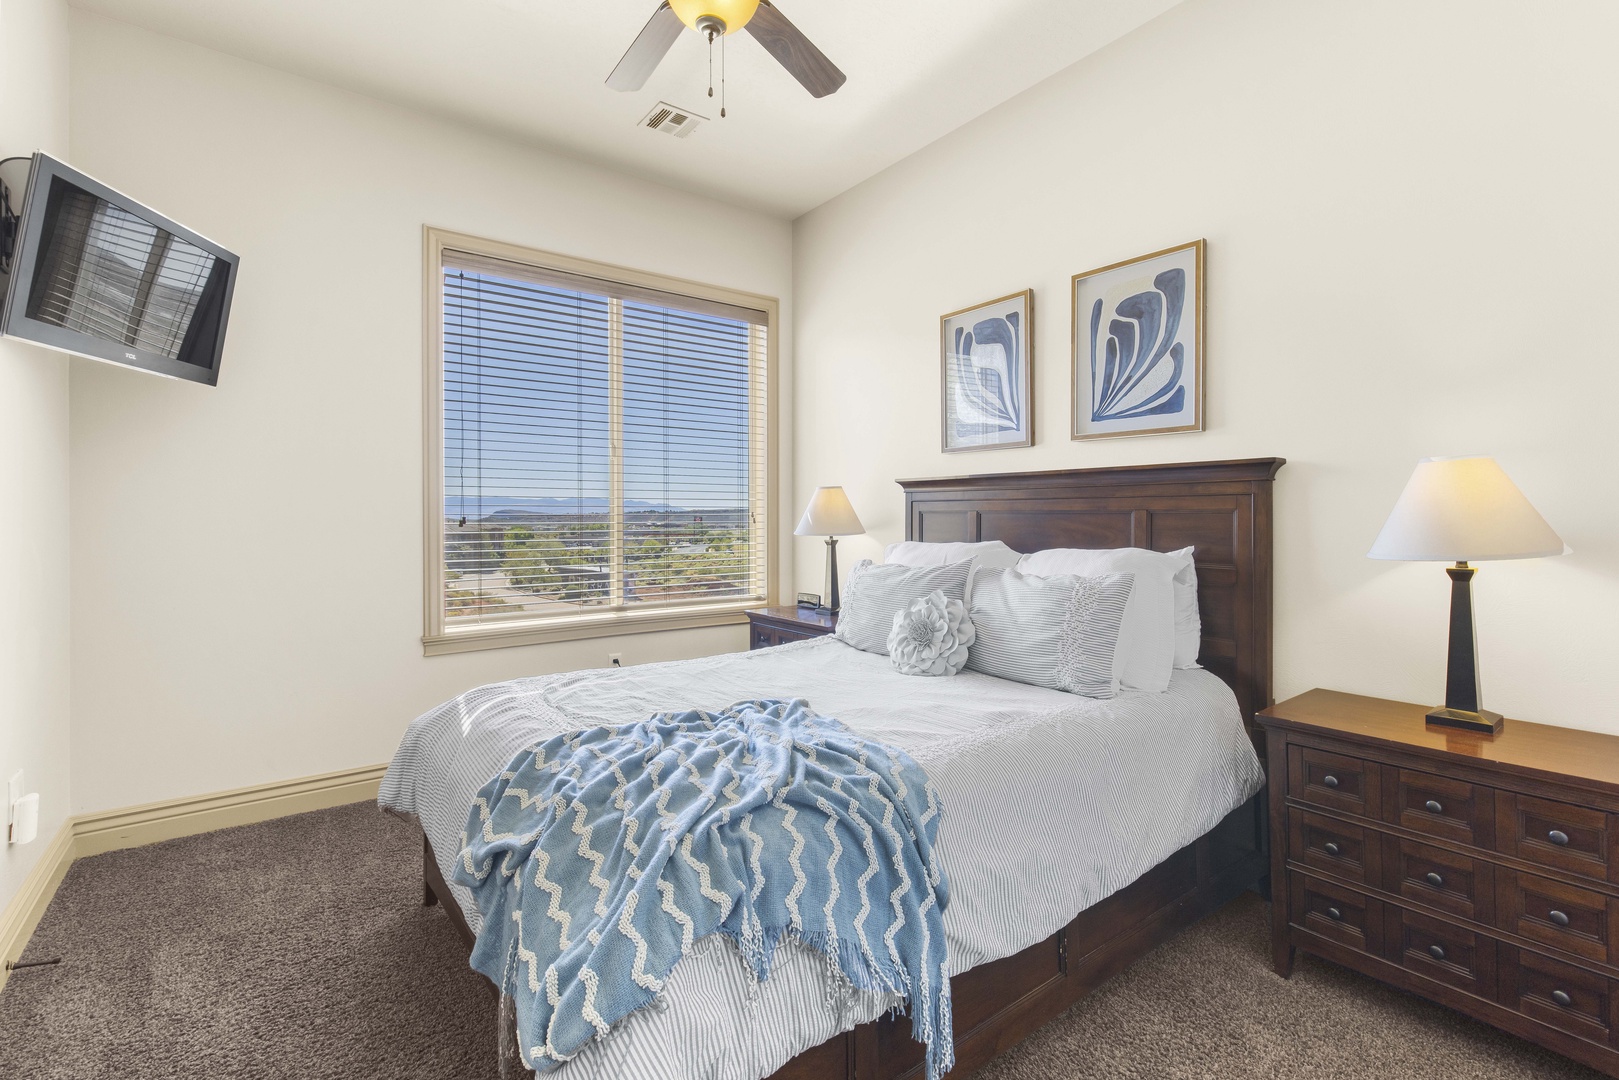 This comfortable queen bedroom offers a Smart TV & stunning view